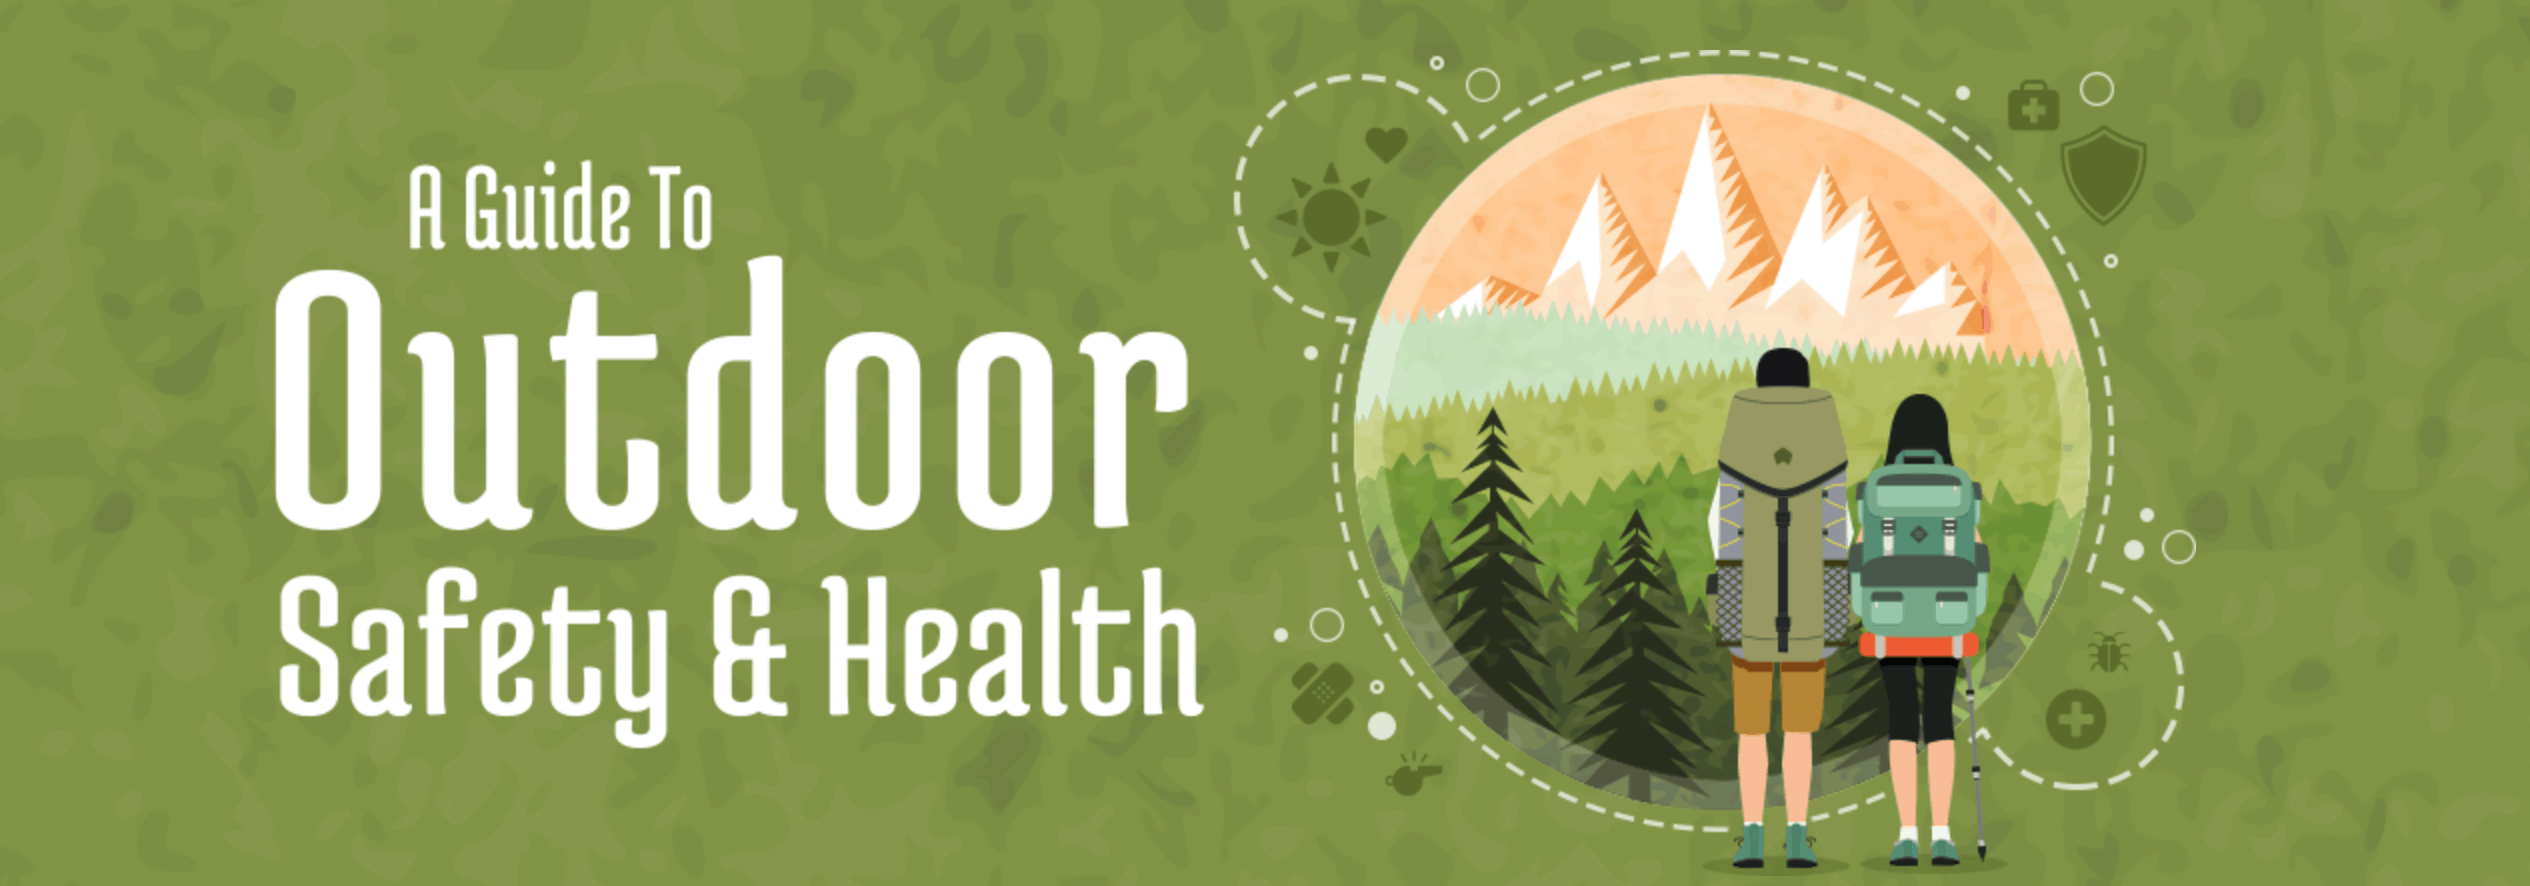 Guide to Outdoor Safety and Health Featured Image